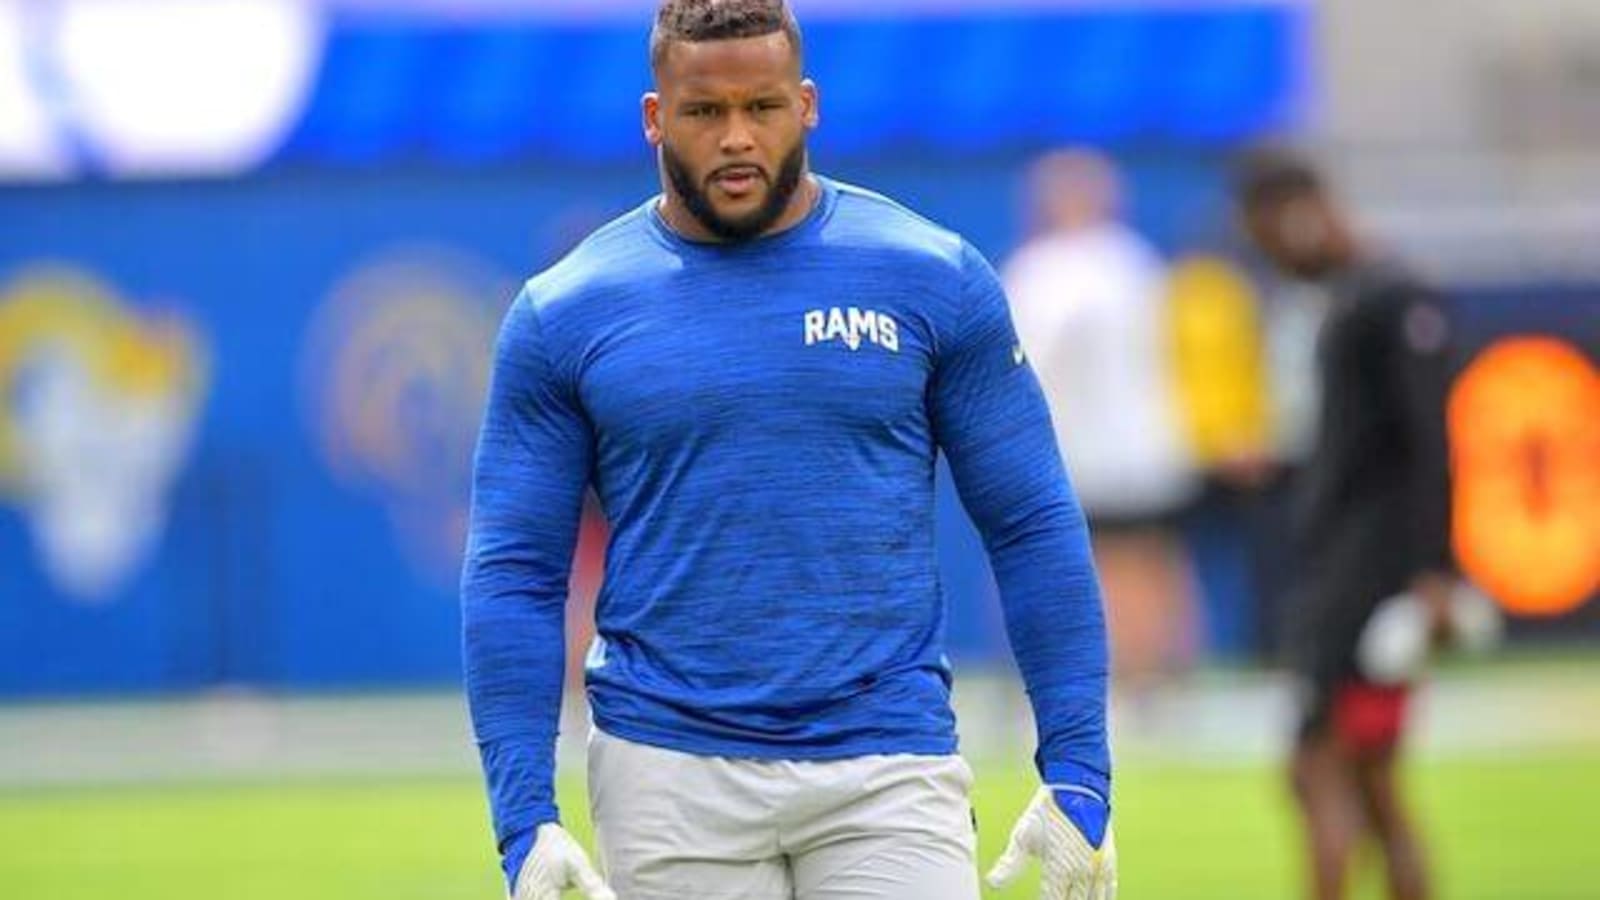  Aaron Donald Underwent Tightrope Surgery, Will Be Ready For Offseason Workouts